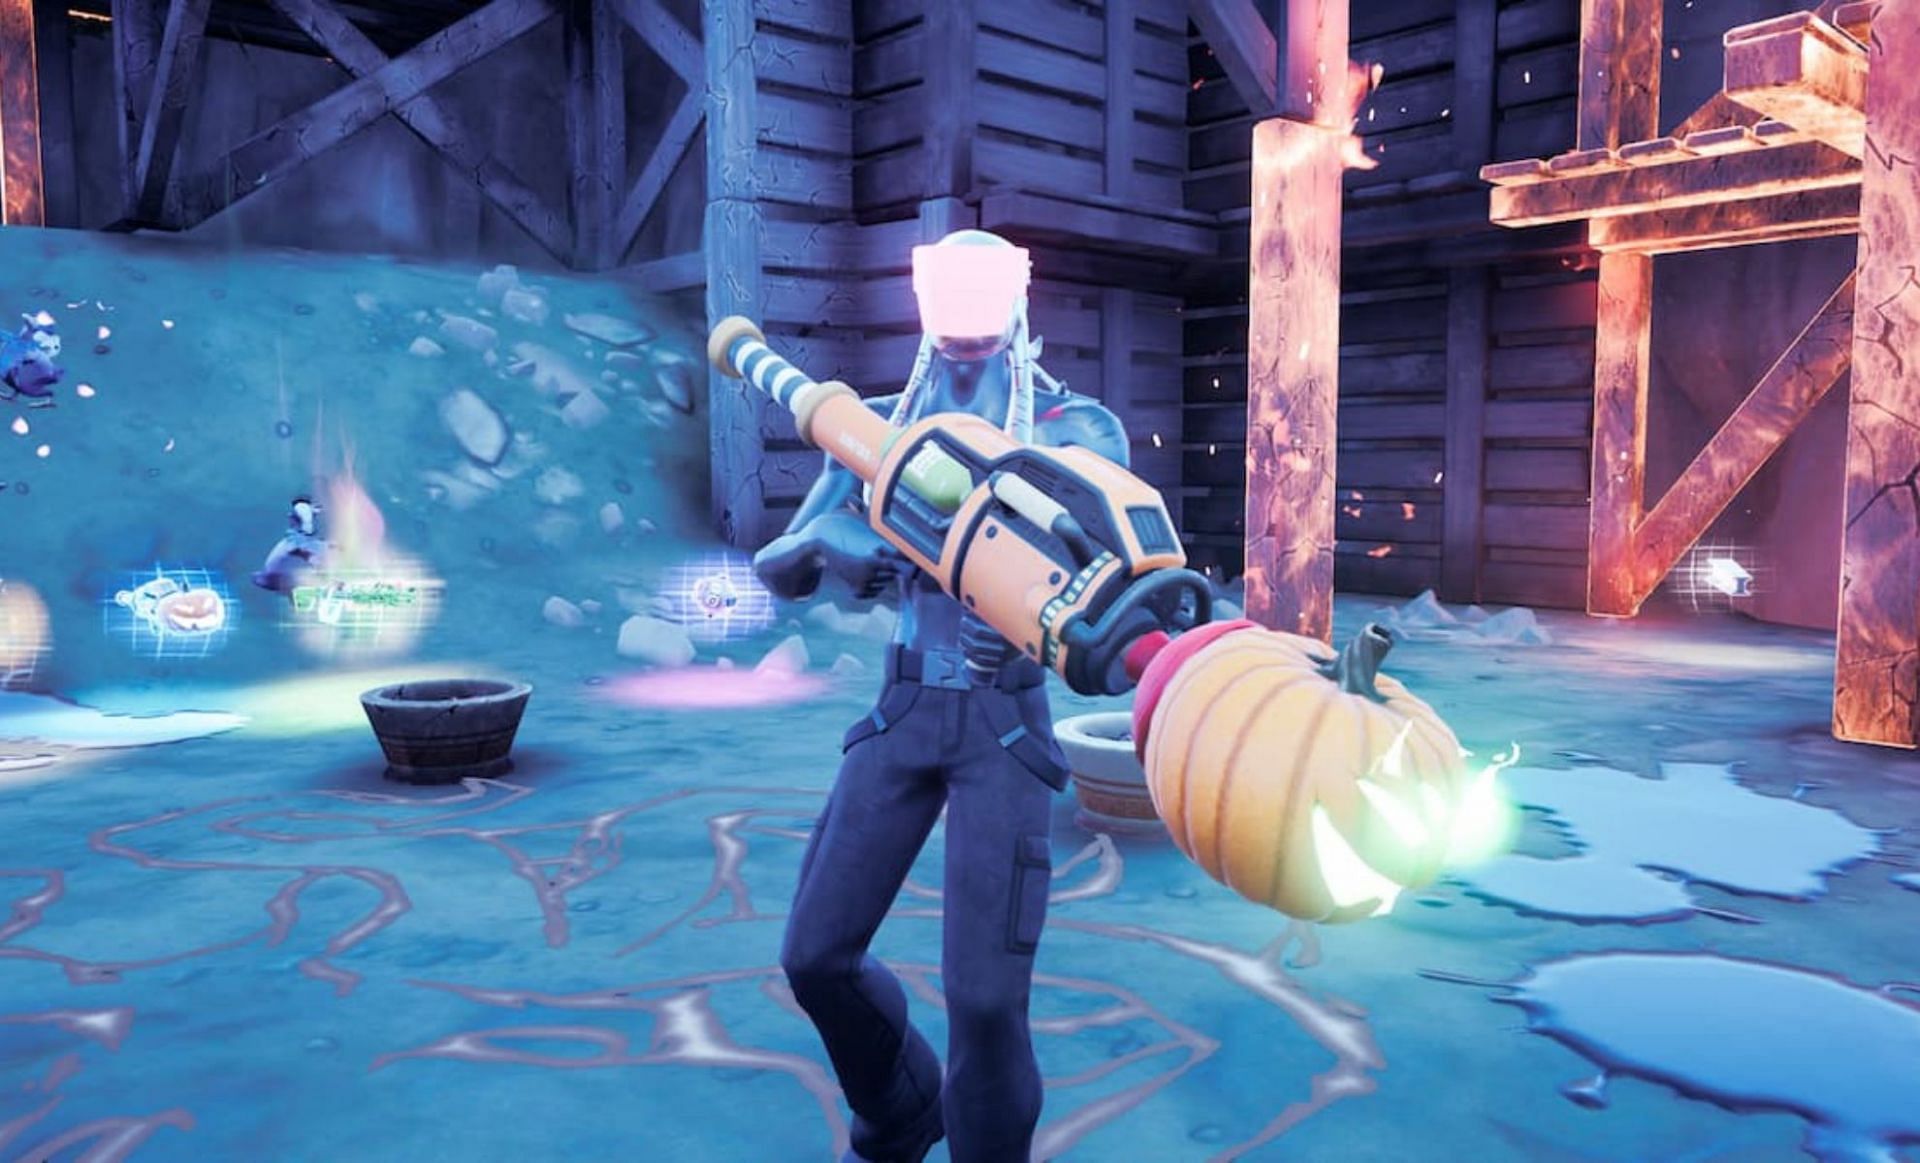 The Inkquisitor in Fortnite (Image via Epic Games)